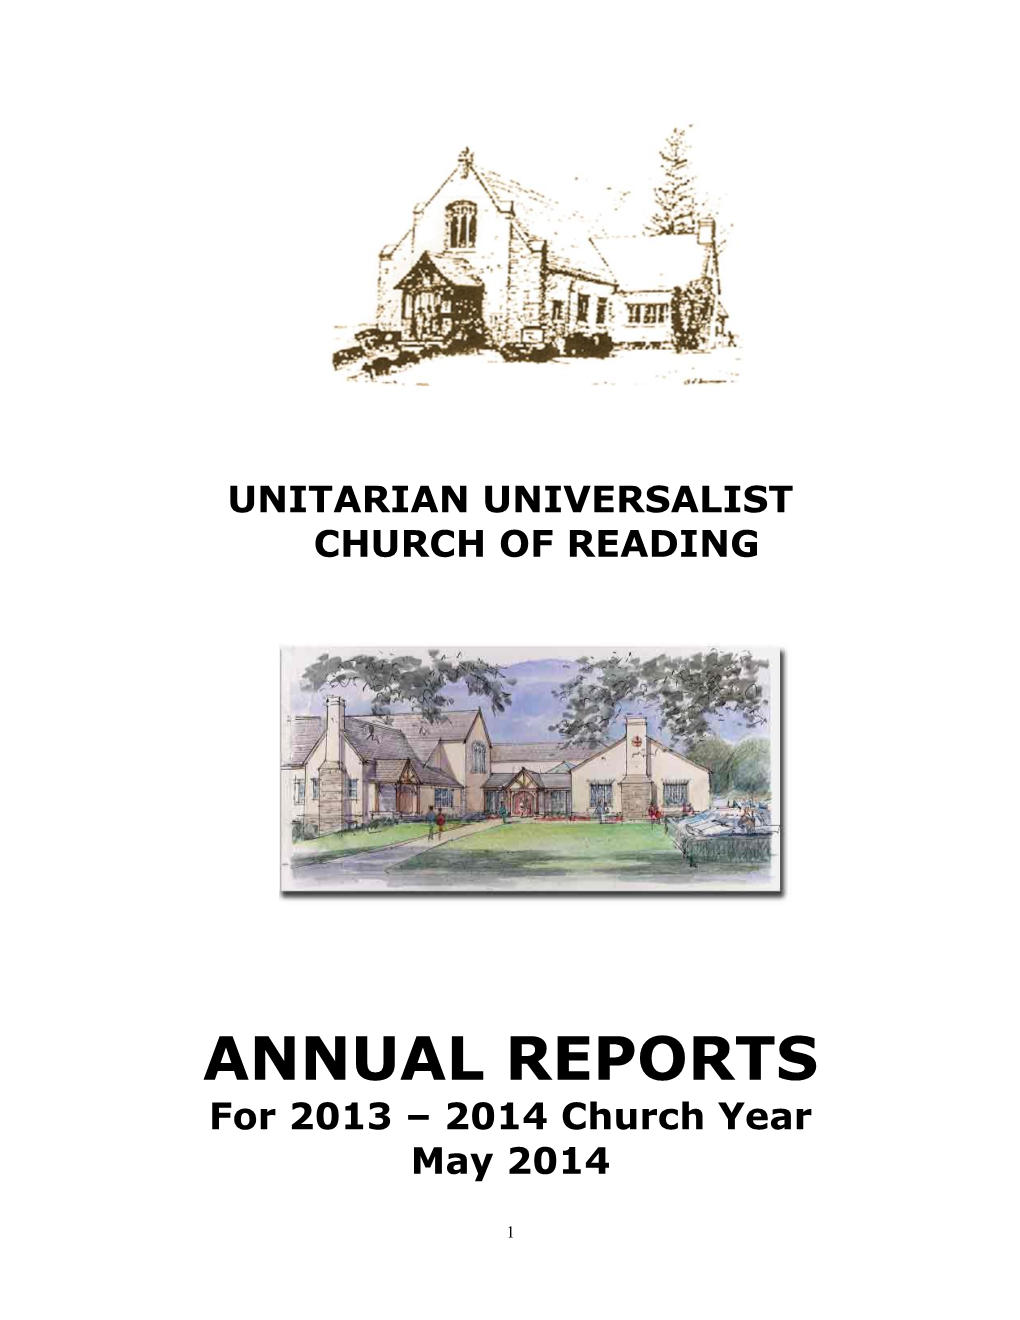 ANNUAL REPORTS for 2013 – 2014 Church Year May 2014